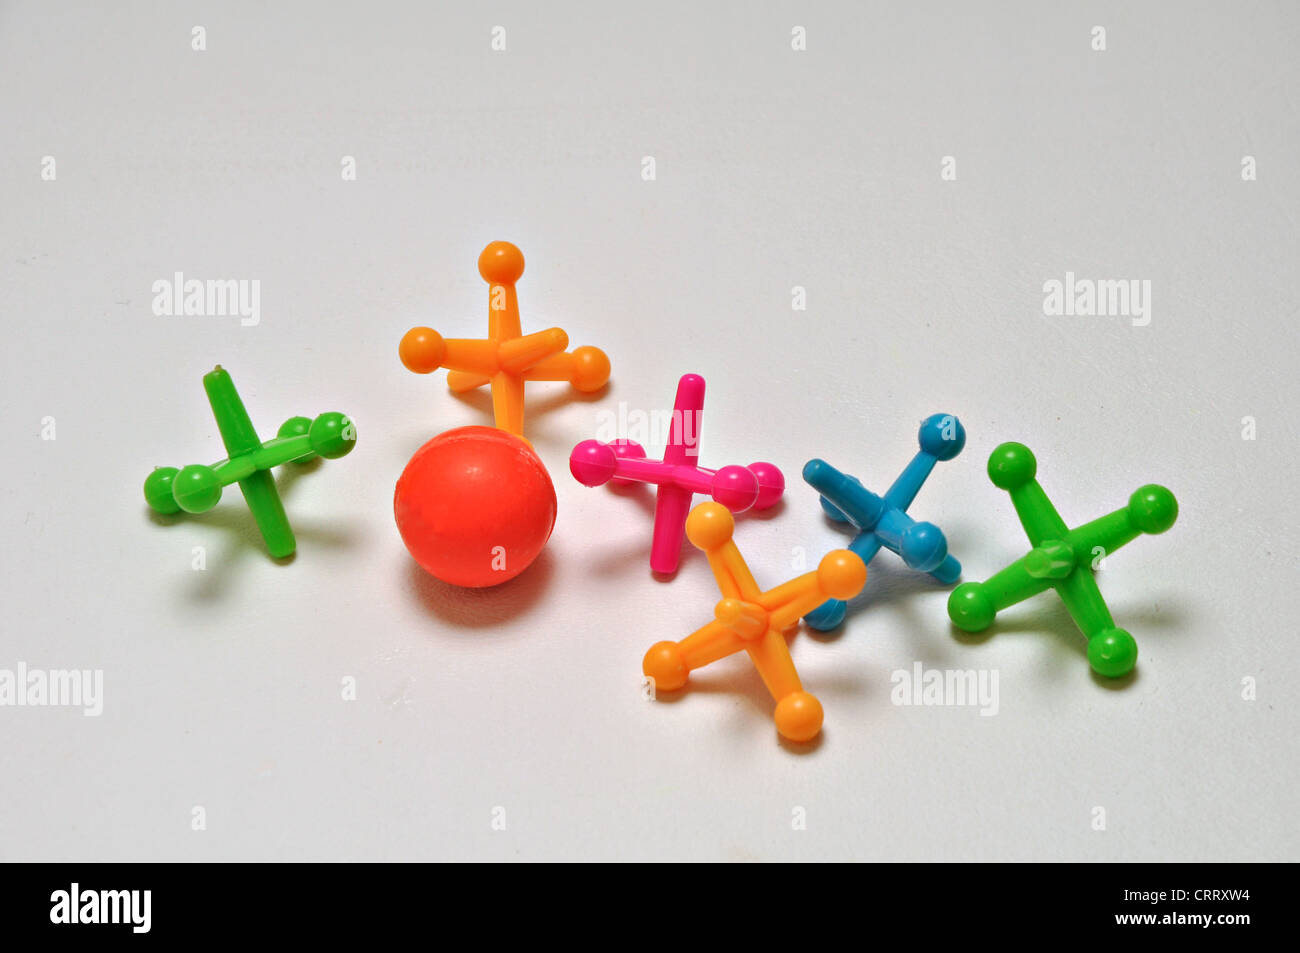 A set of ball and jacks rest on a plain background Stock Photo